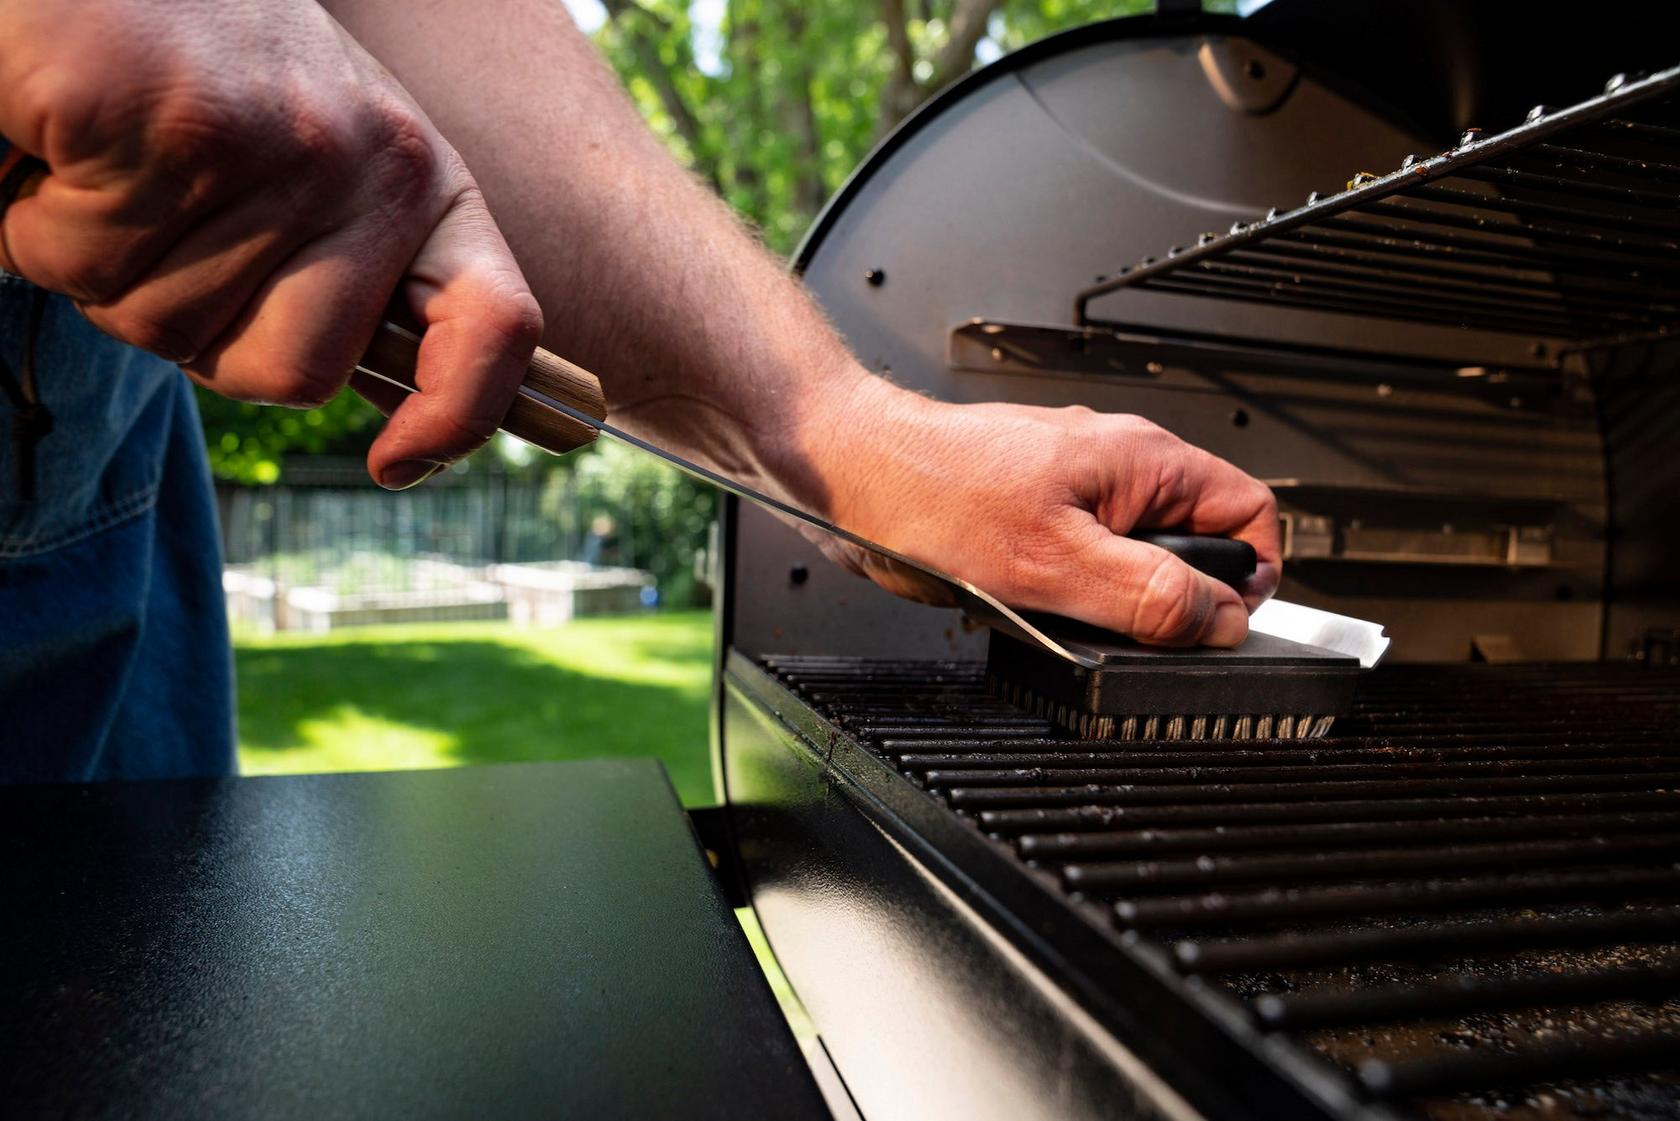 traeger-bbq-cleaning-brush-lifestyle-2